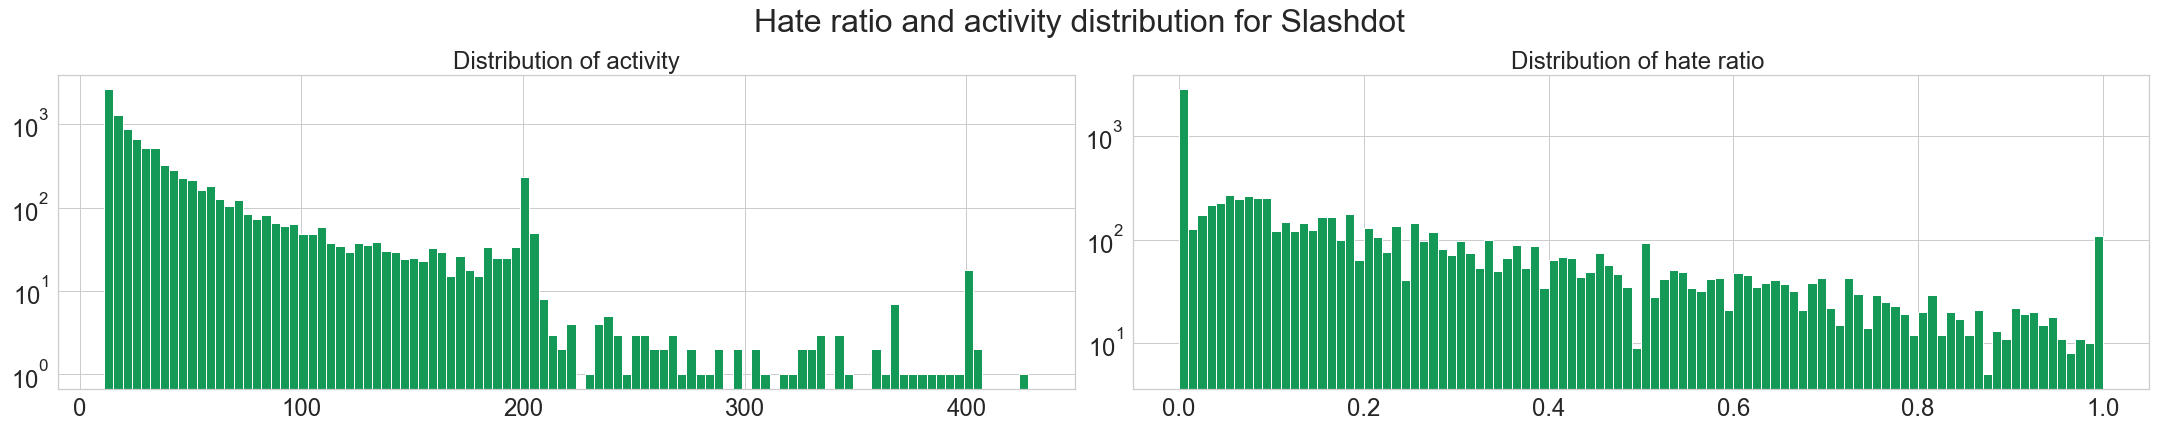 Distribution of activity and hate ratio for Slashdot